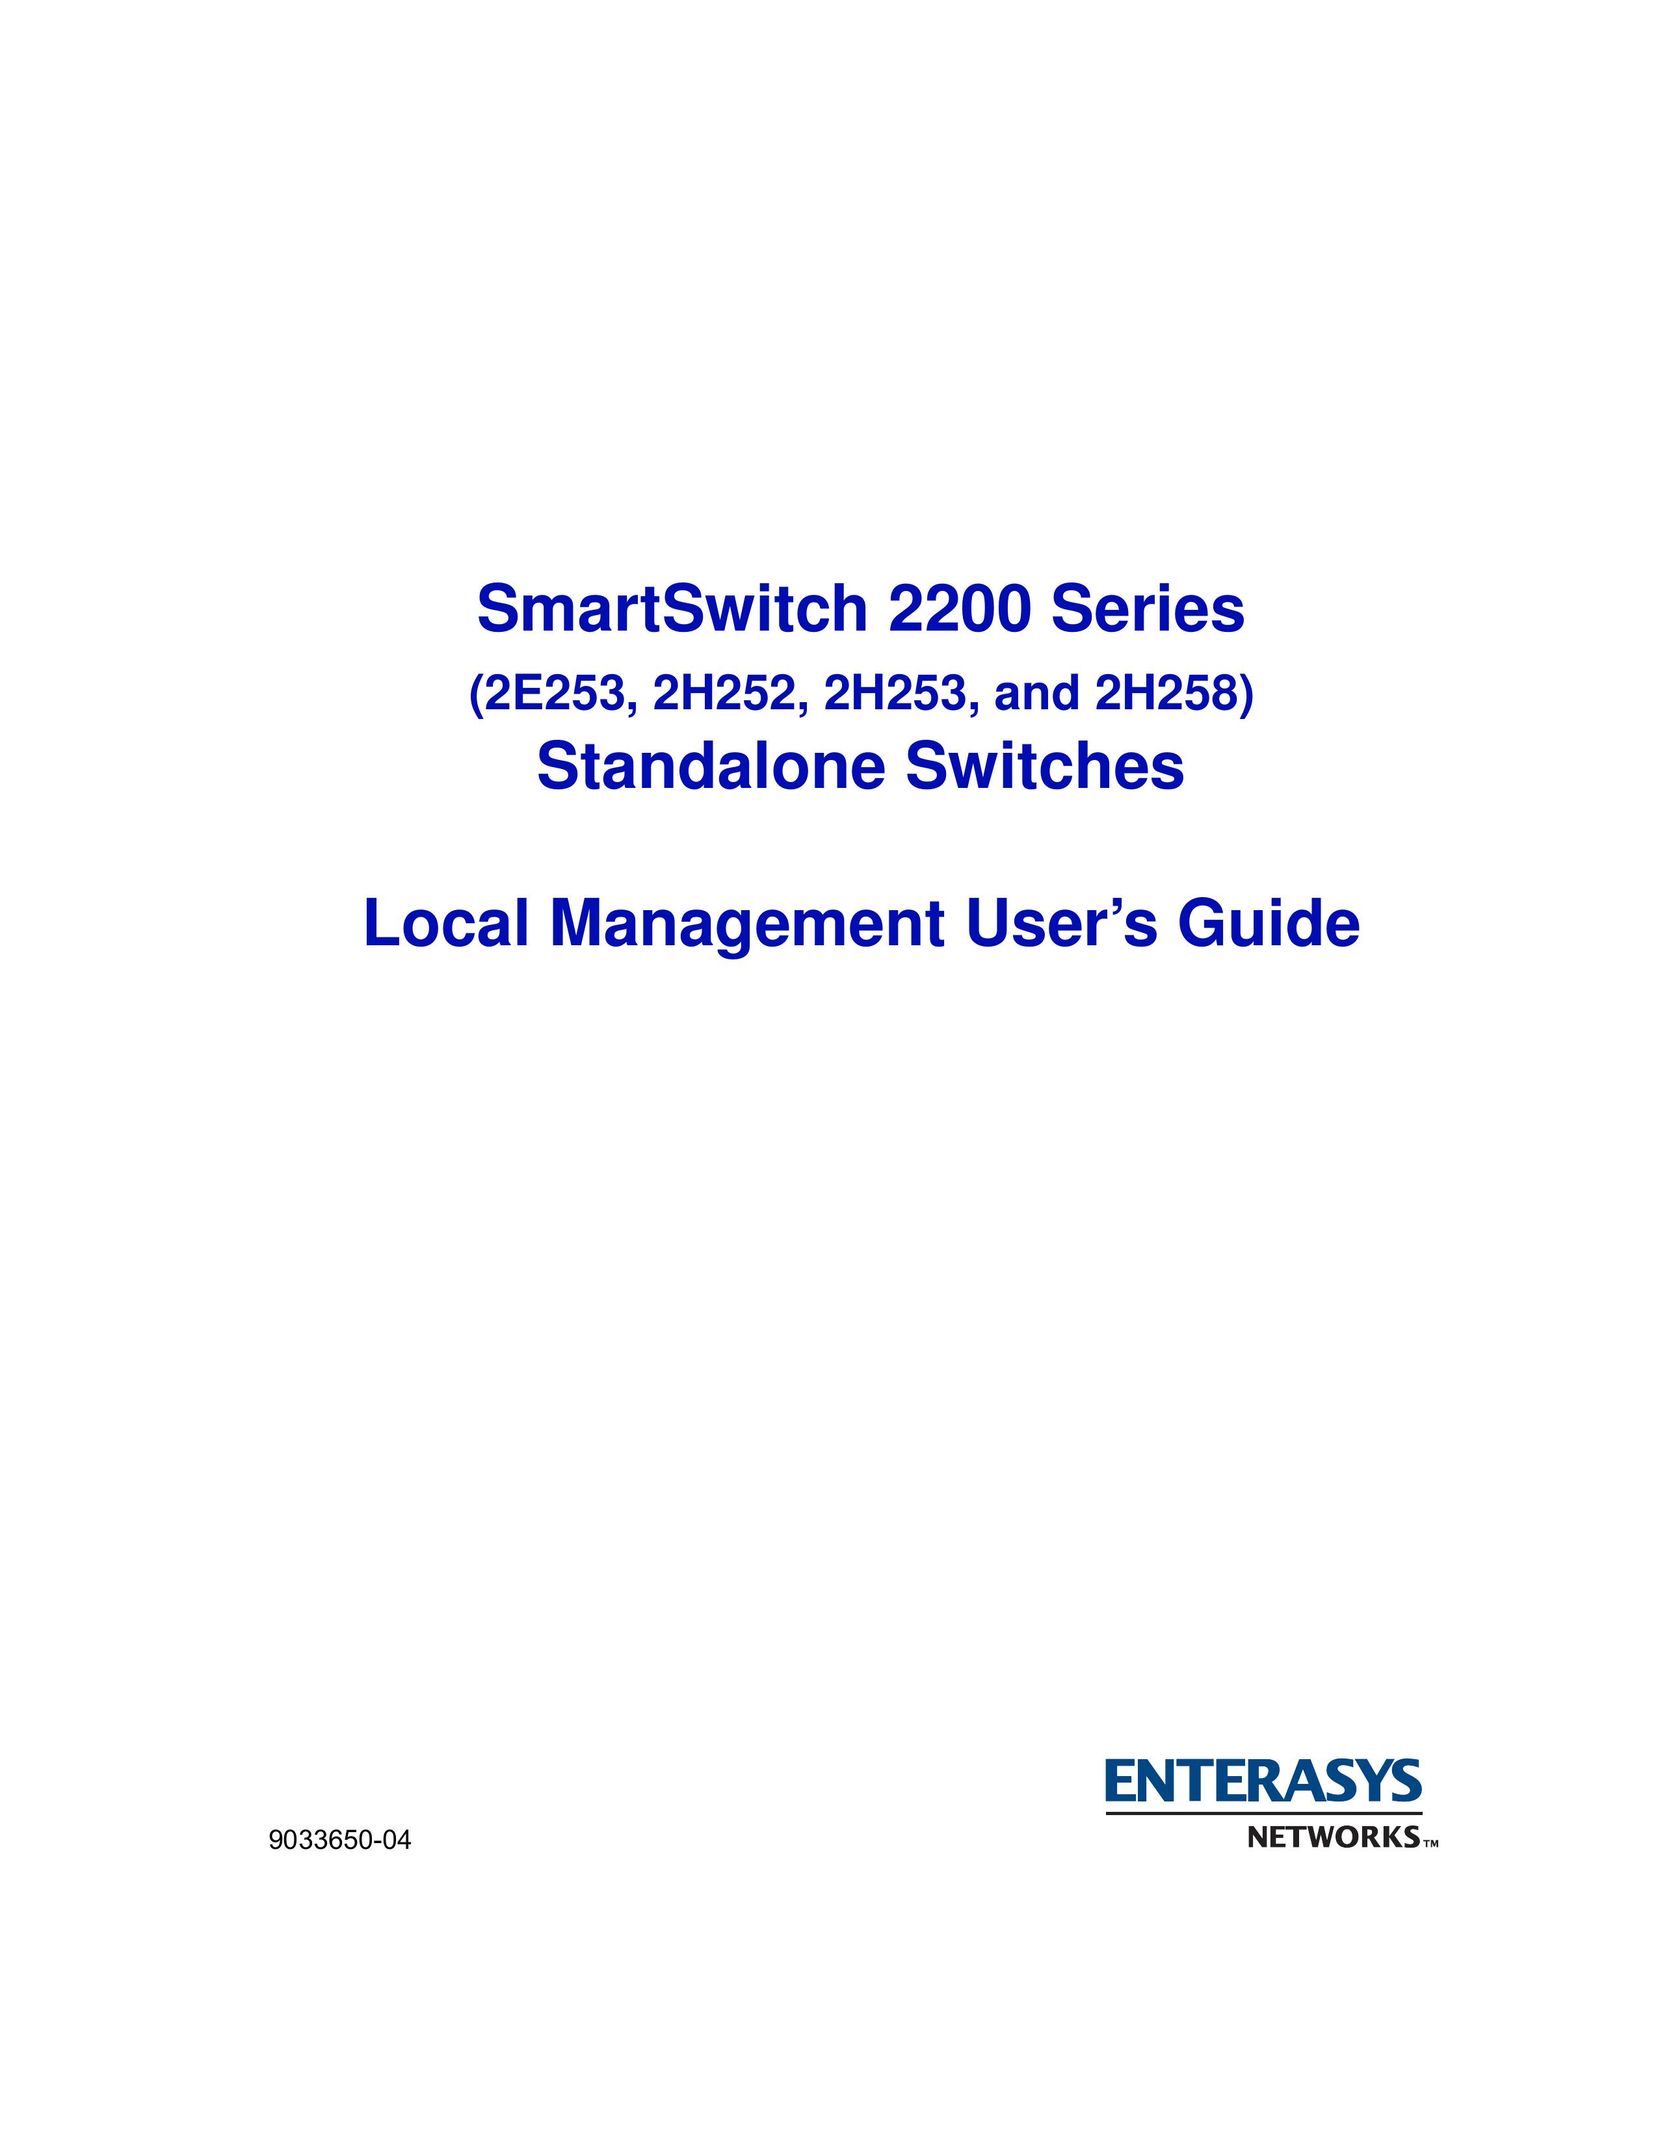 Enterasys Networks 2H258 Network Card User Manual